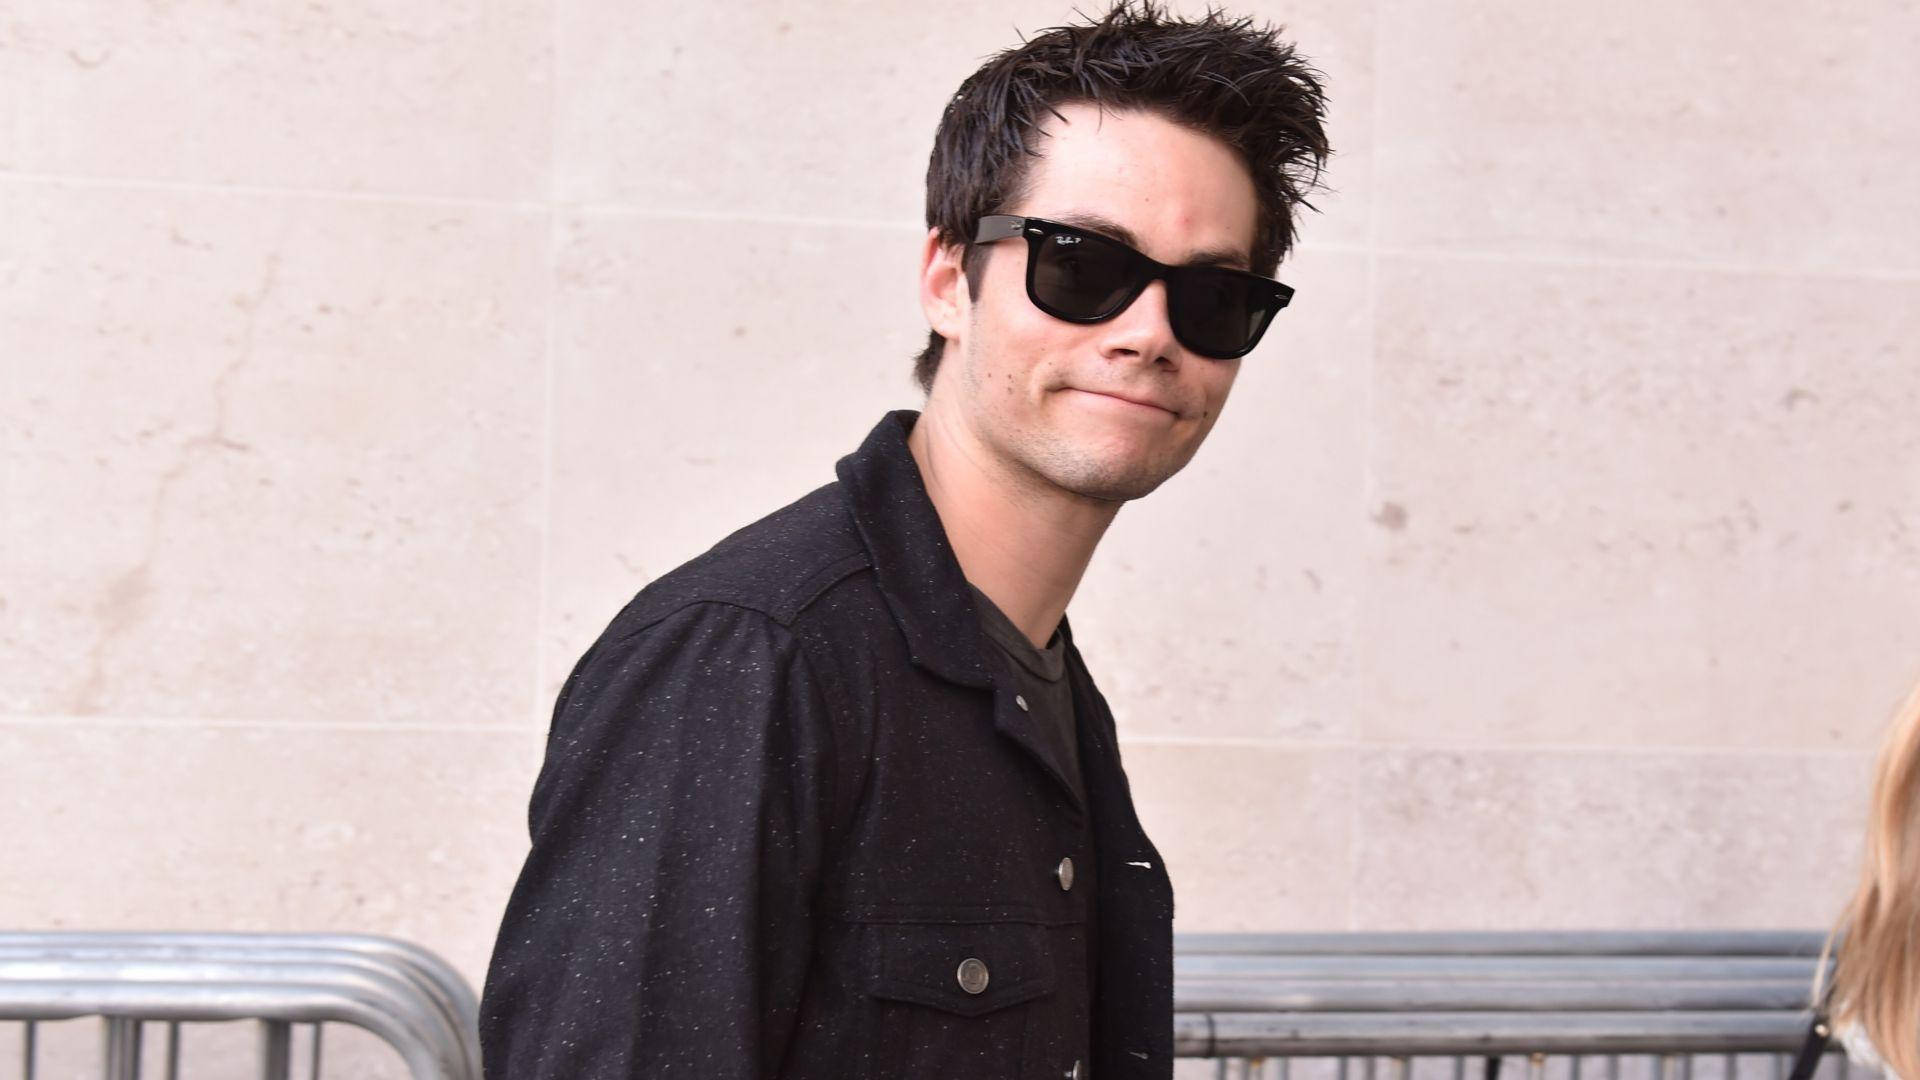 Dylan O'brien Sunglasses Background